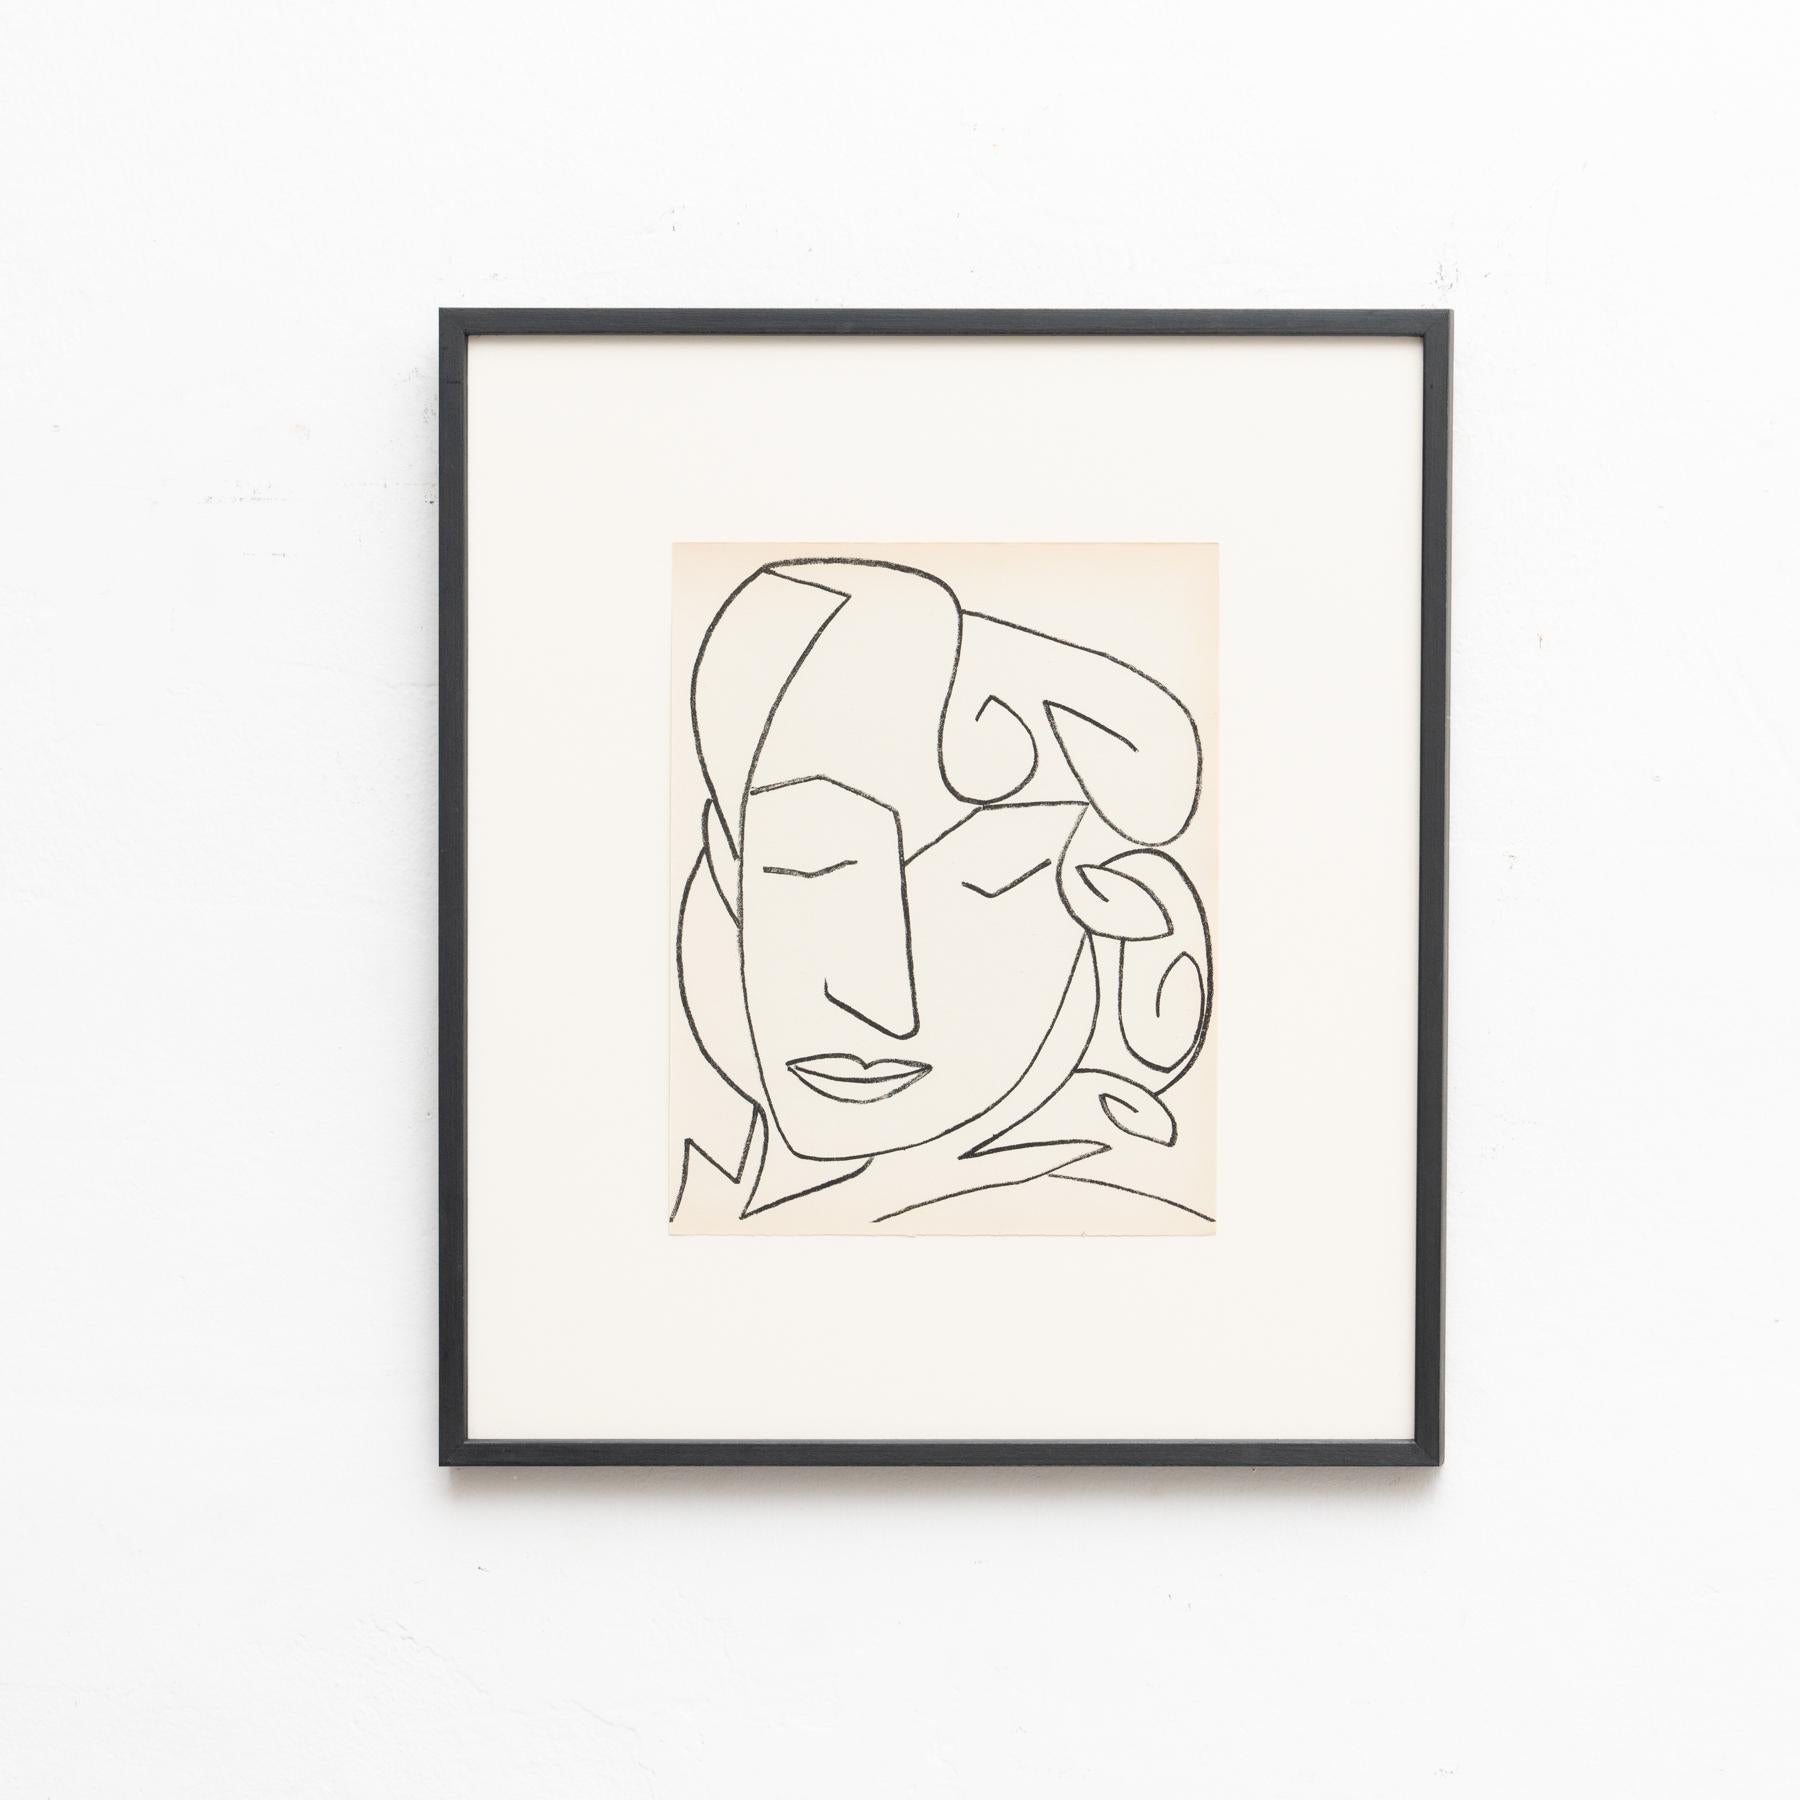 François Gilot original lithograph from 'Portraits of a Woman' series. 

From the poetry book 